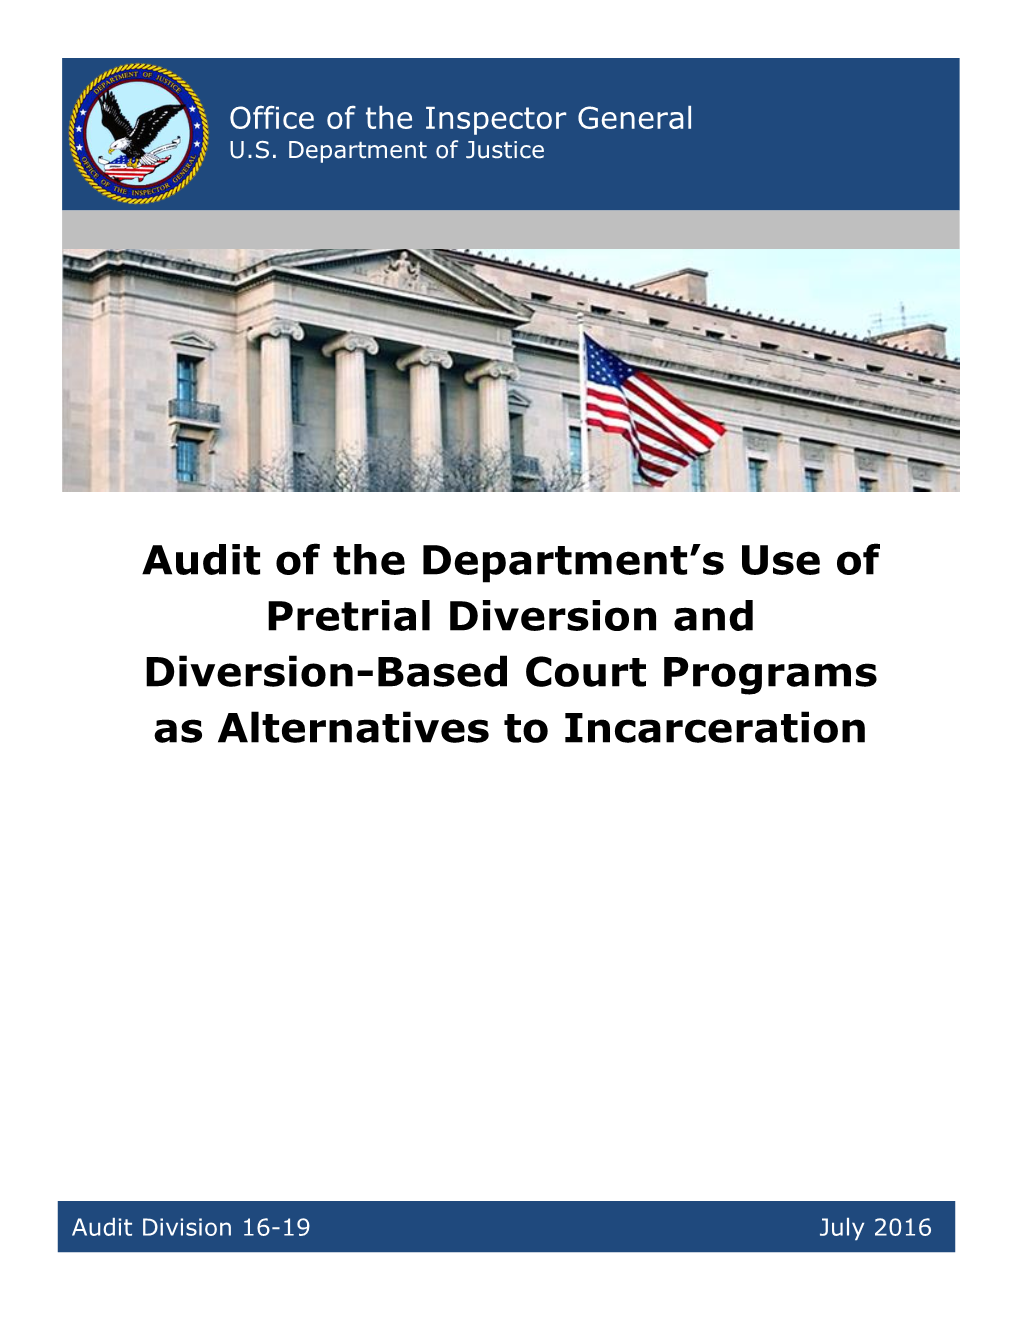 Audit of the Department's Use of Pretrial Diversion and Diversion-Based Court Programs As Alternatives to Incarceration